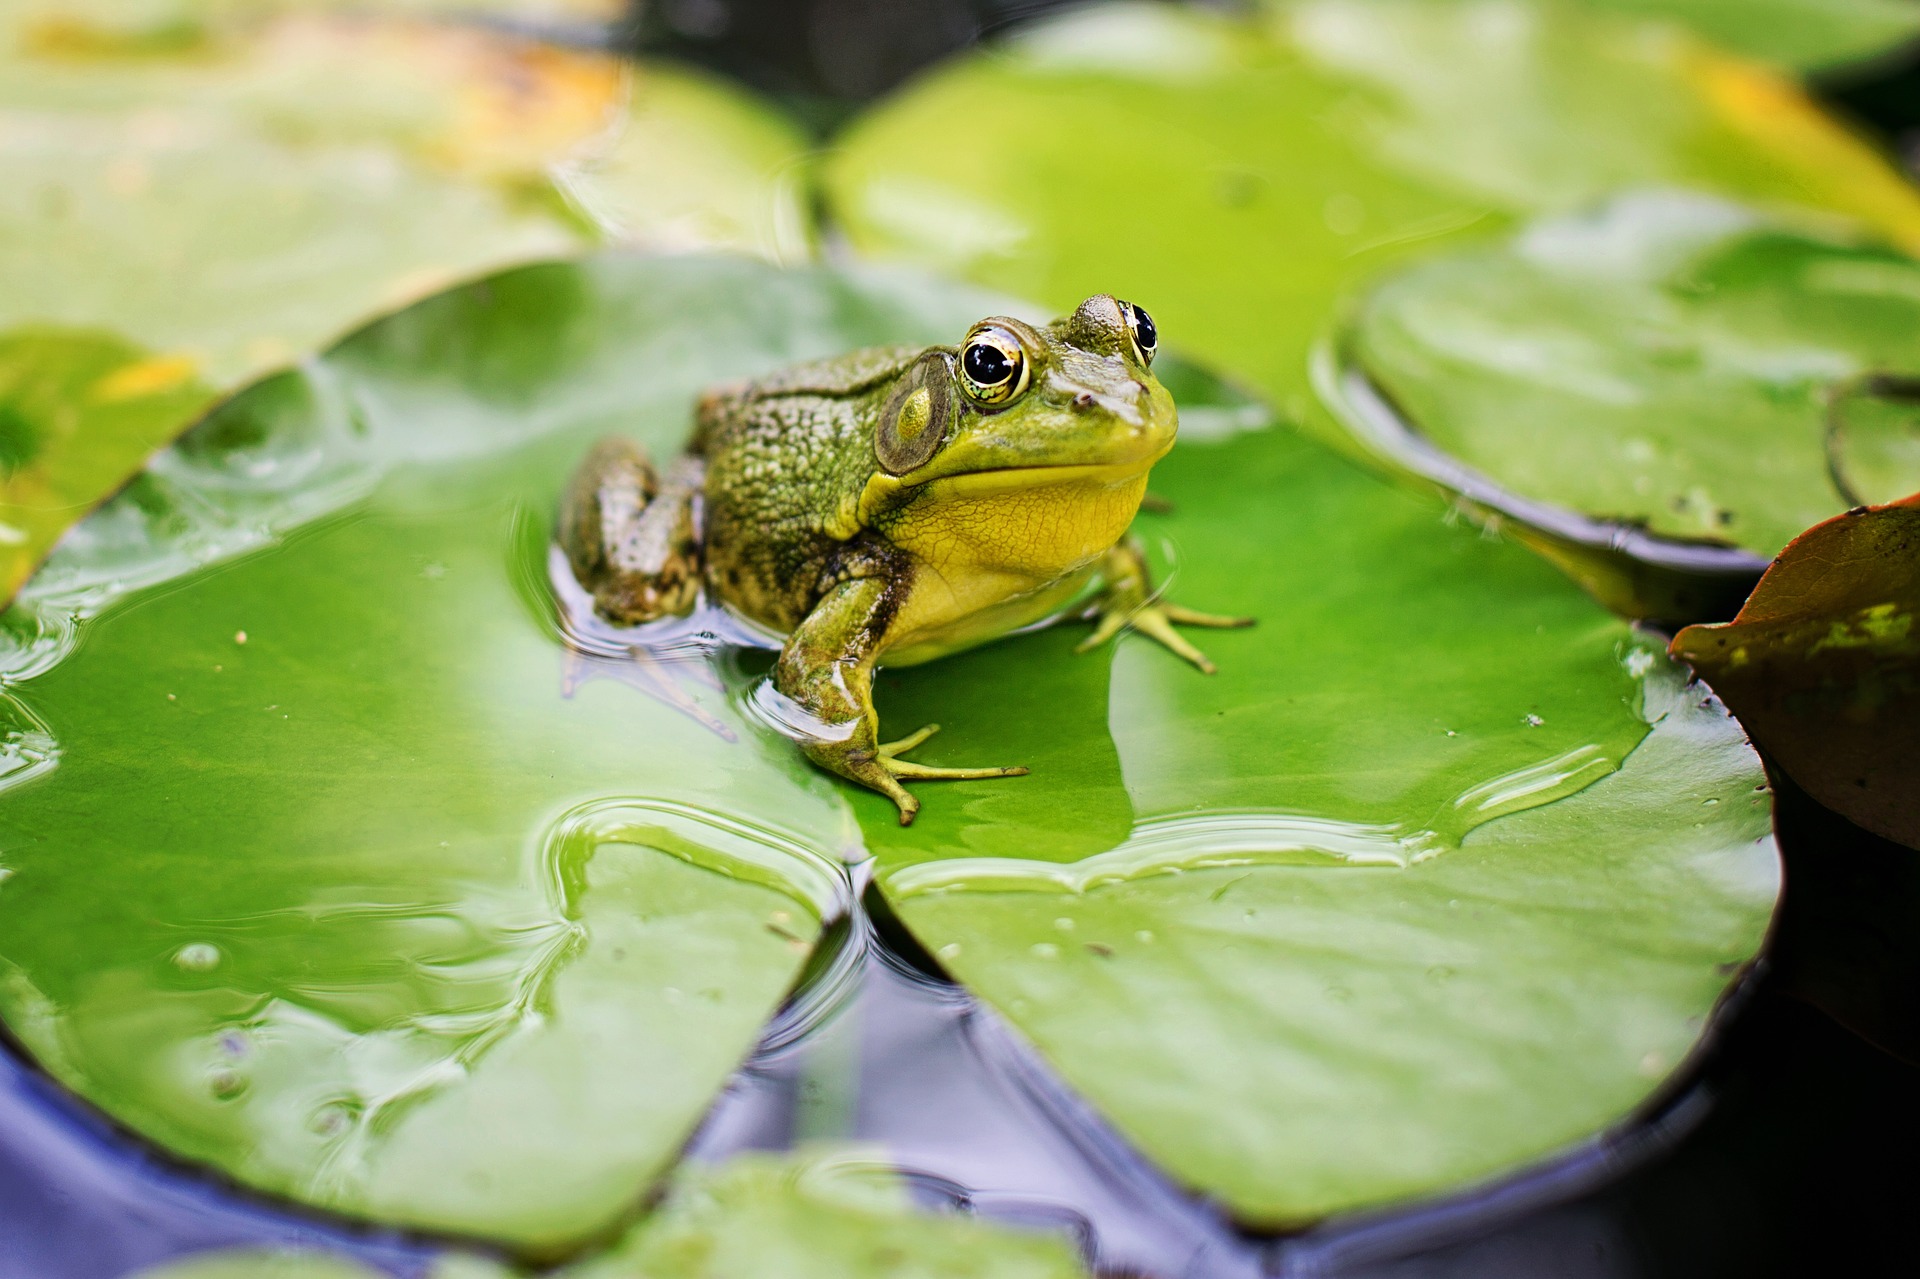 Uncovering antibiotics and cancer drugs in bullfrog DNA 